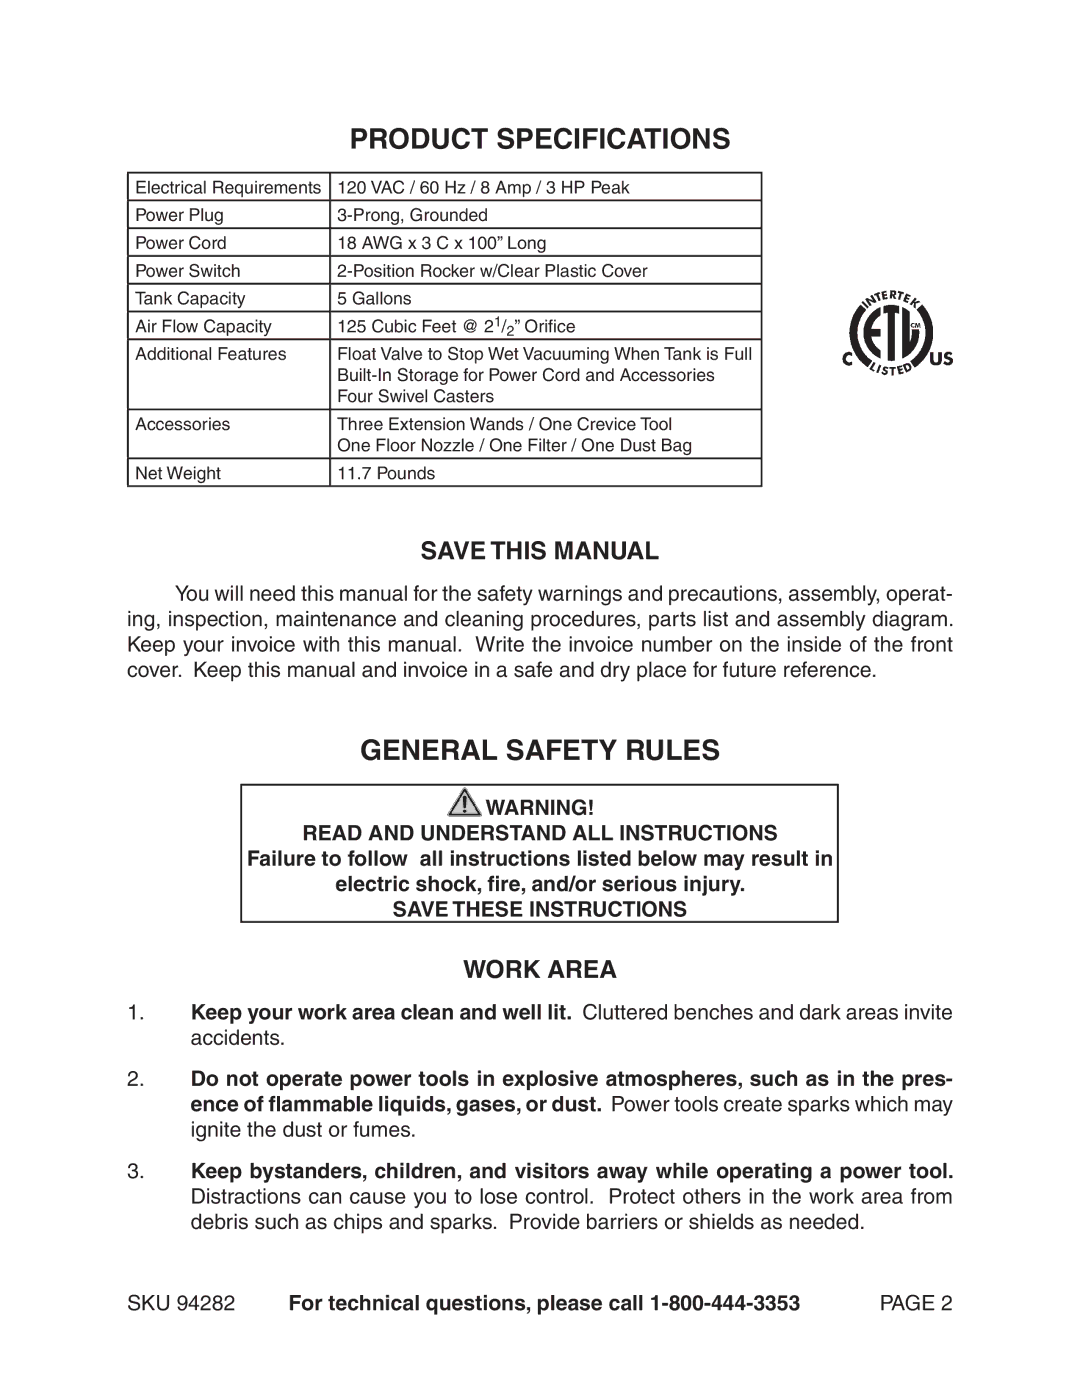 Chicago Electric 94282 manual Product Specifications, General Safety Rules, Save this Manual, Work Area 